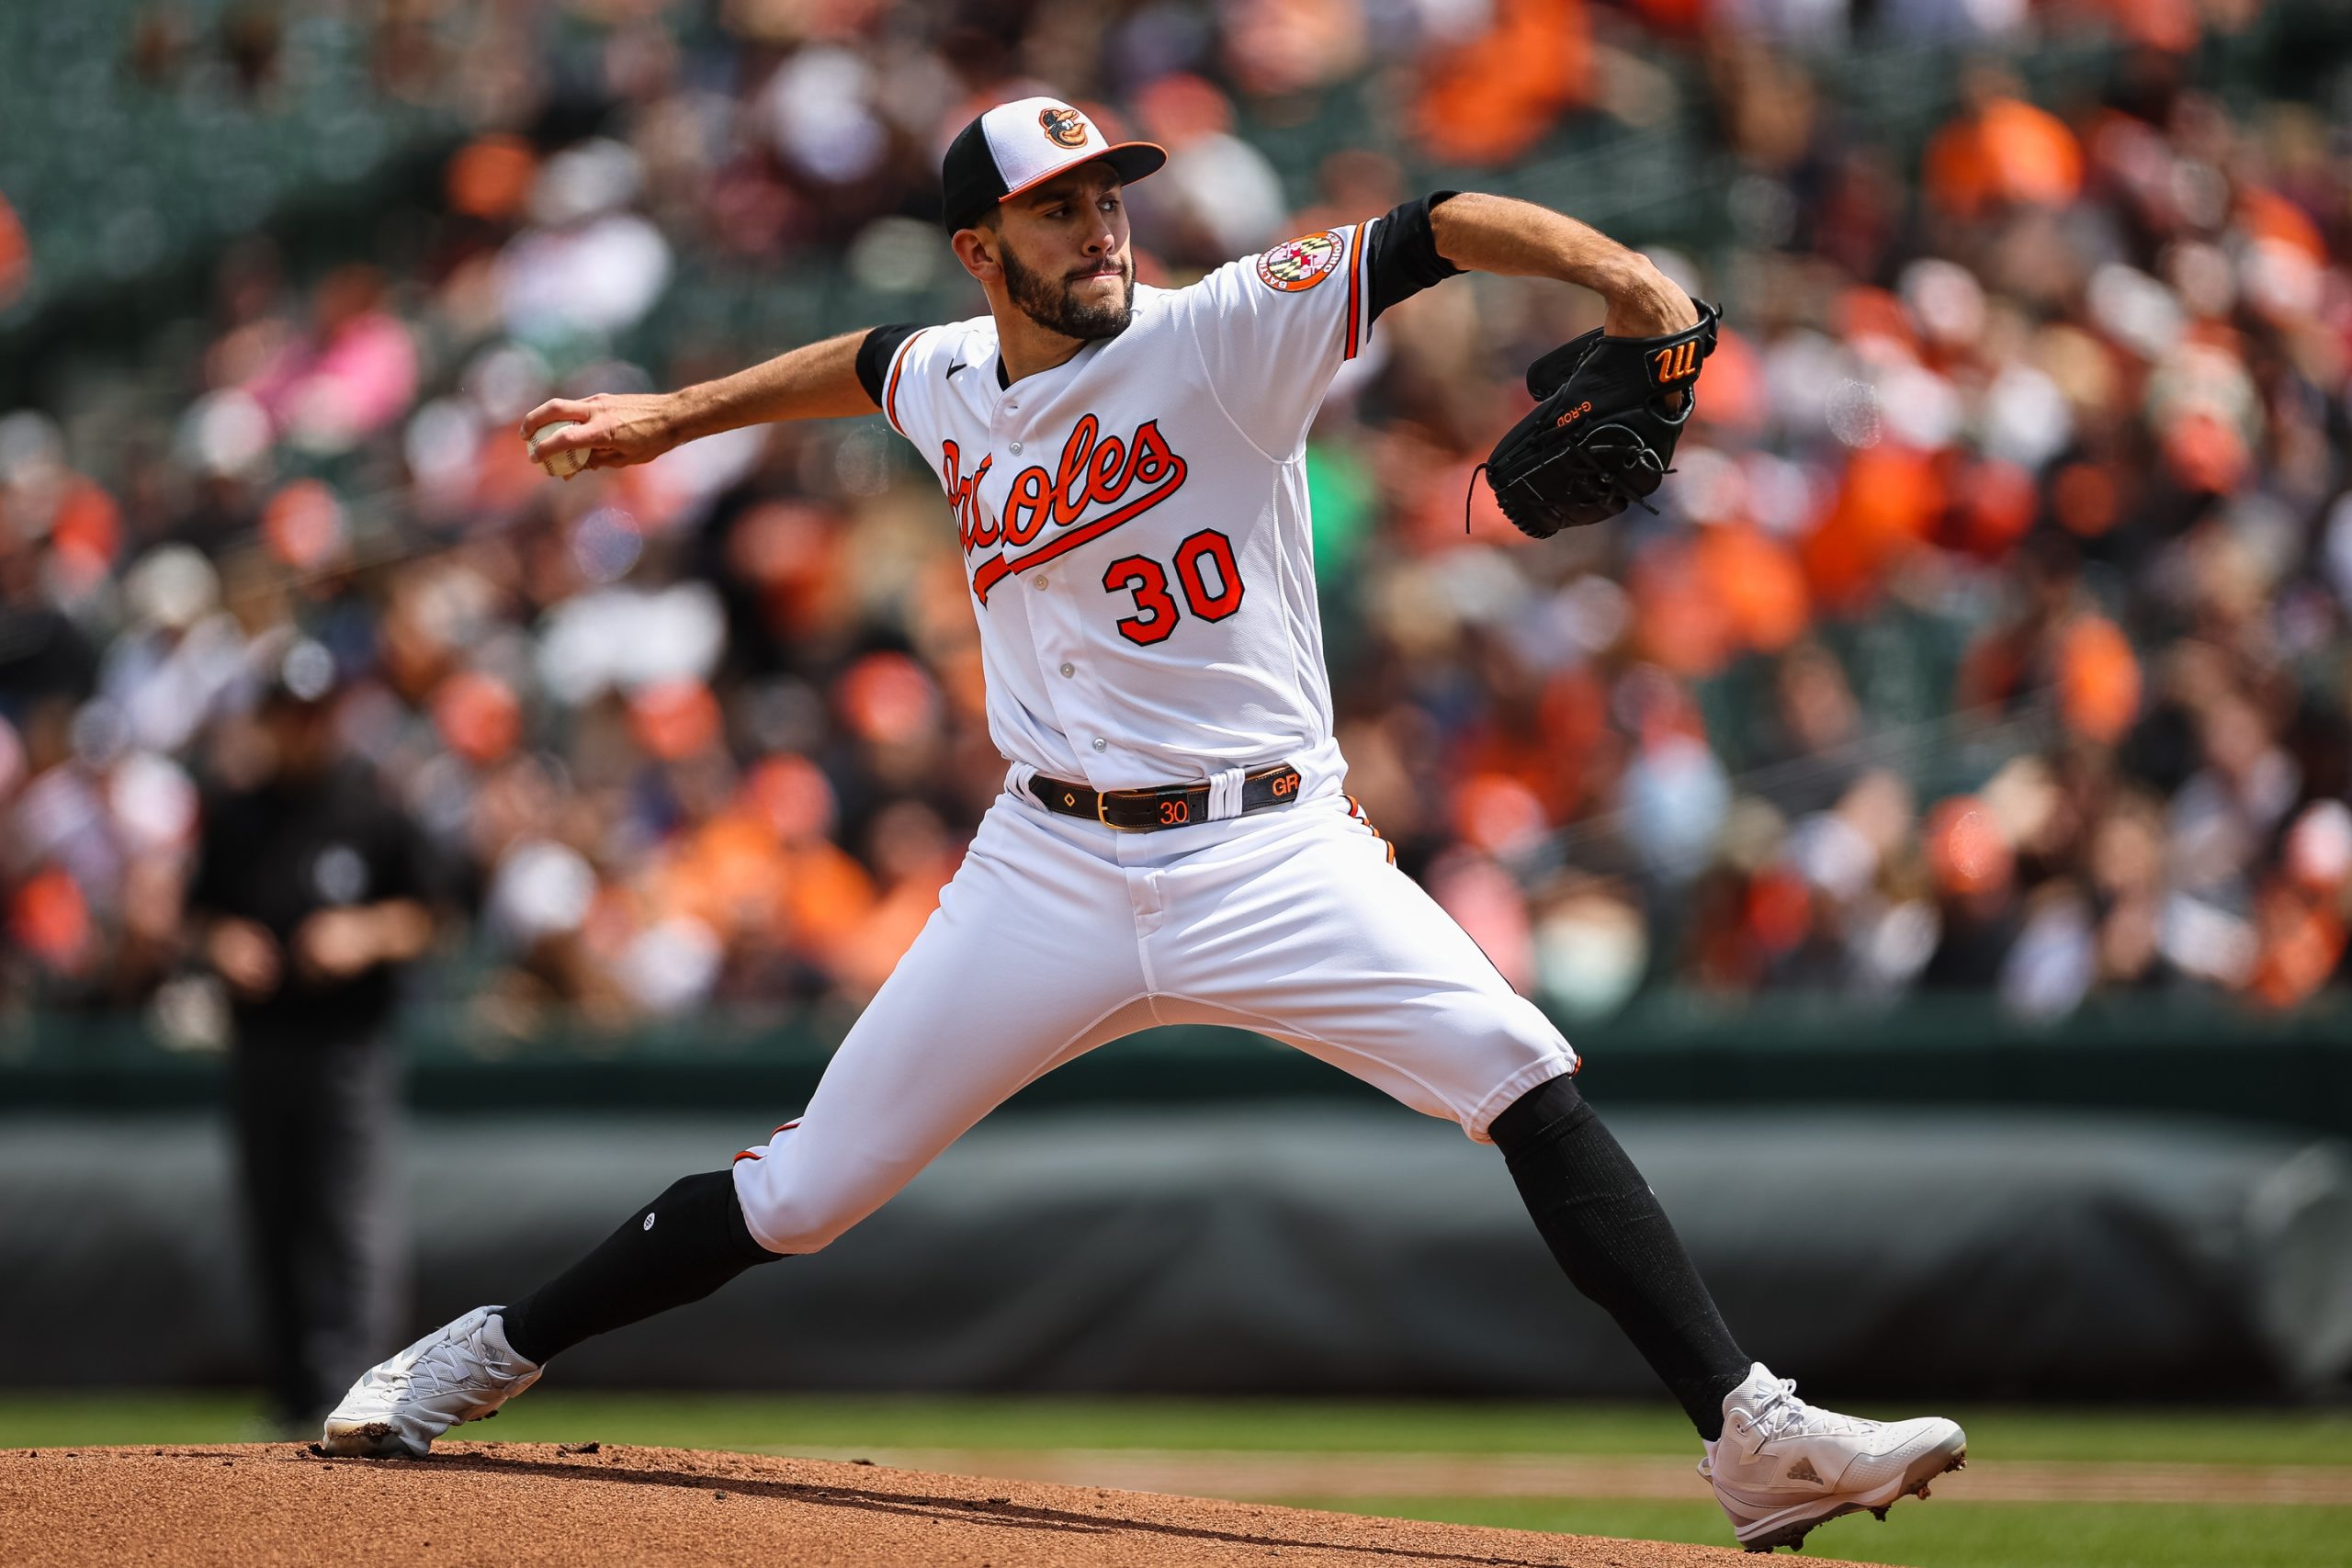 O's top pitching prospect Rodriguez to make MLB debut Wednesday